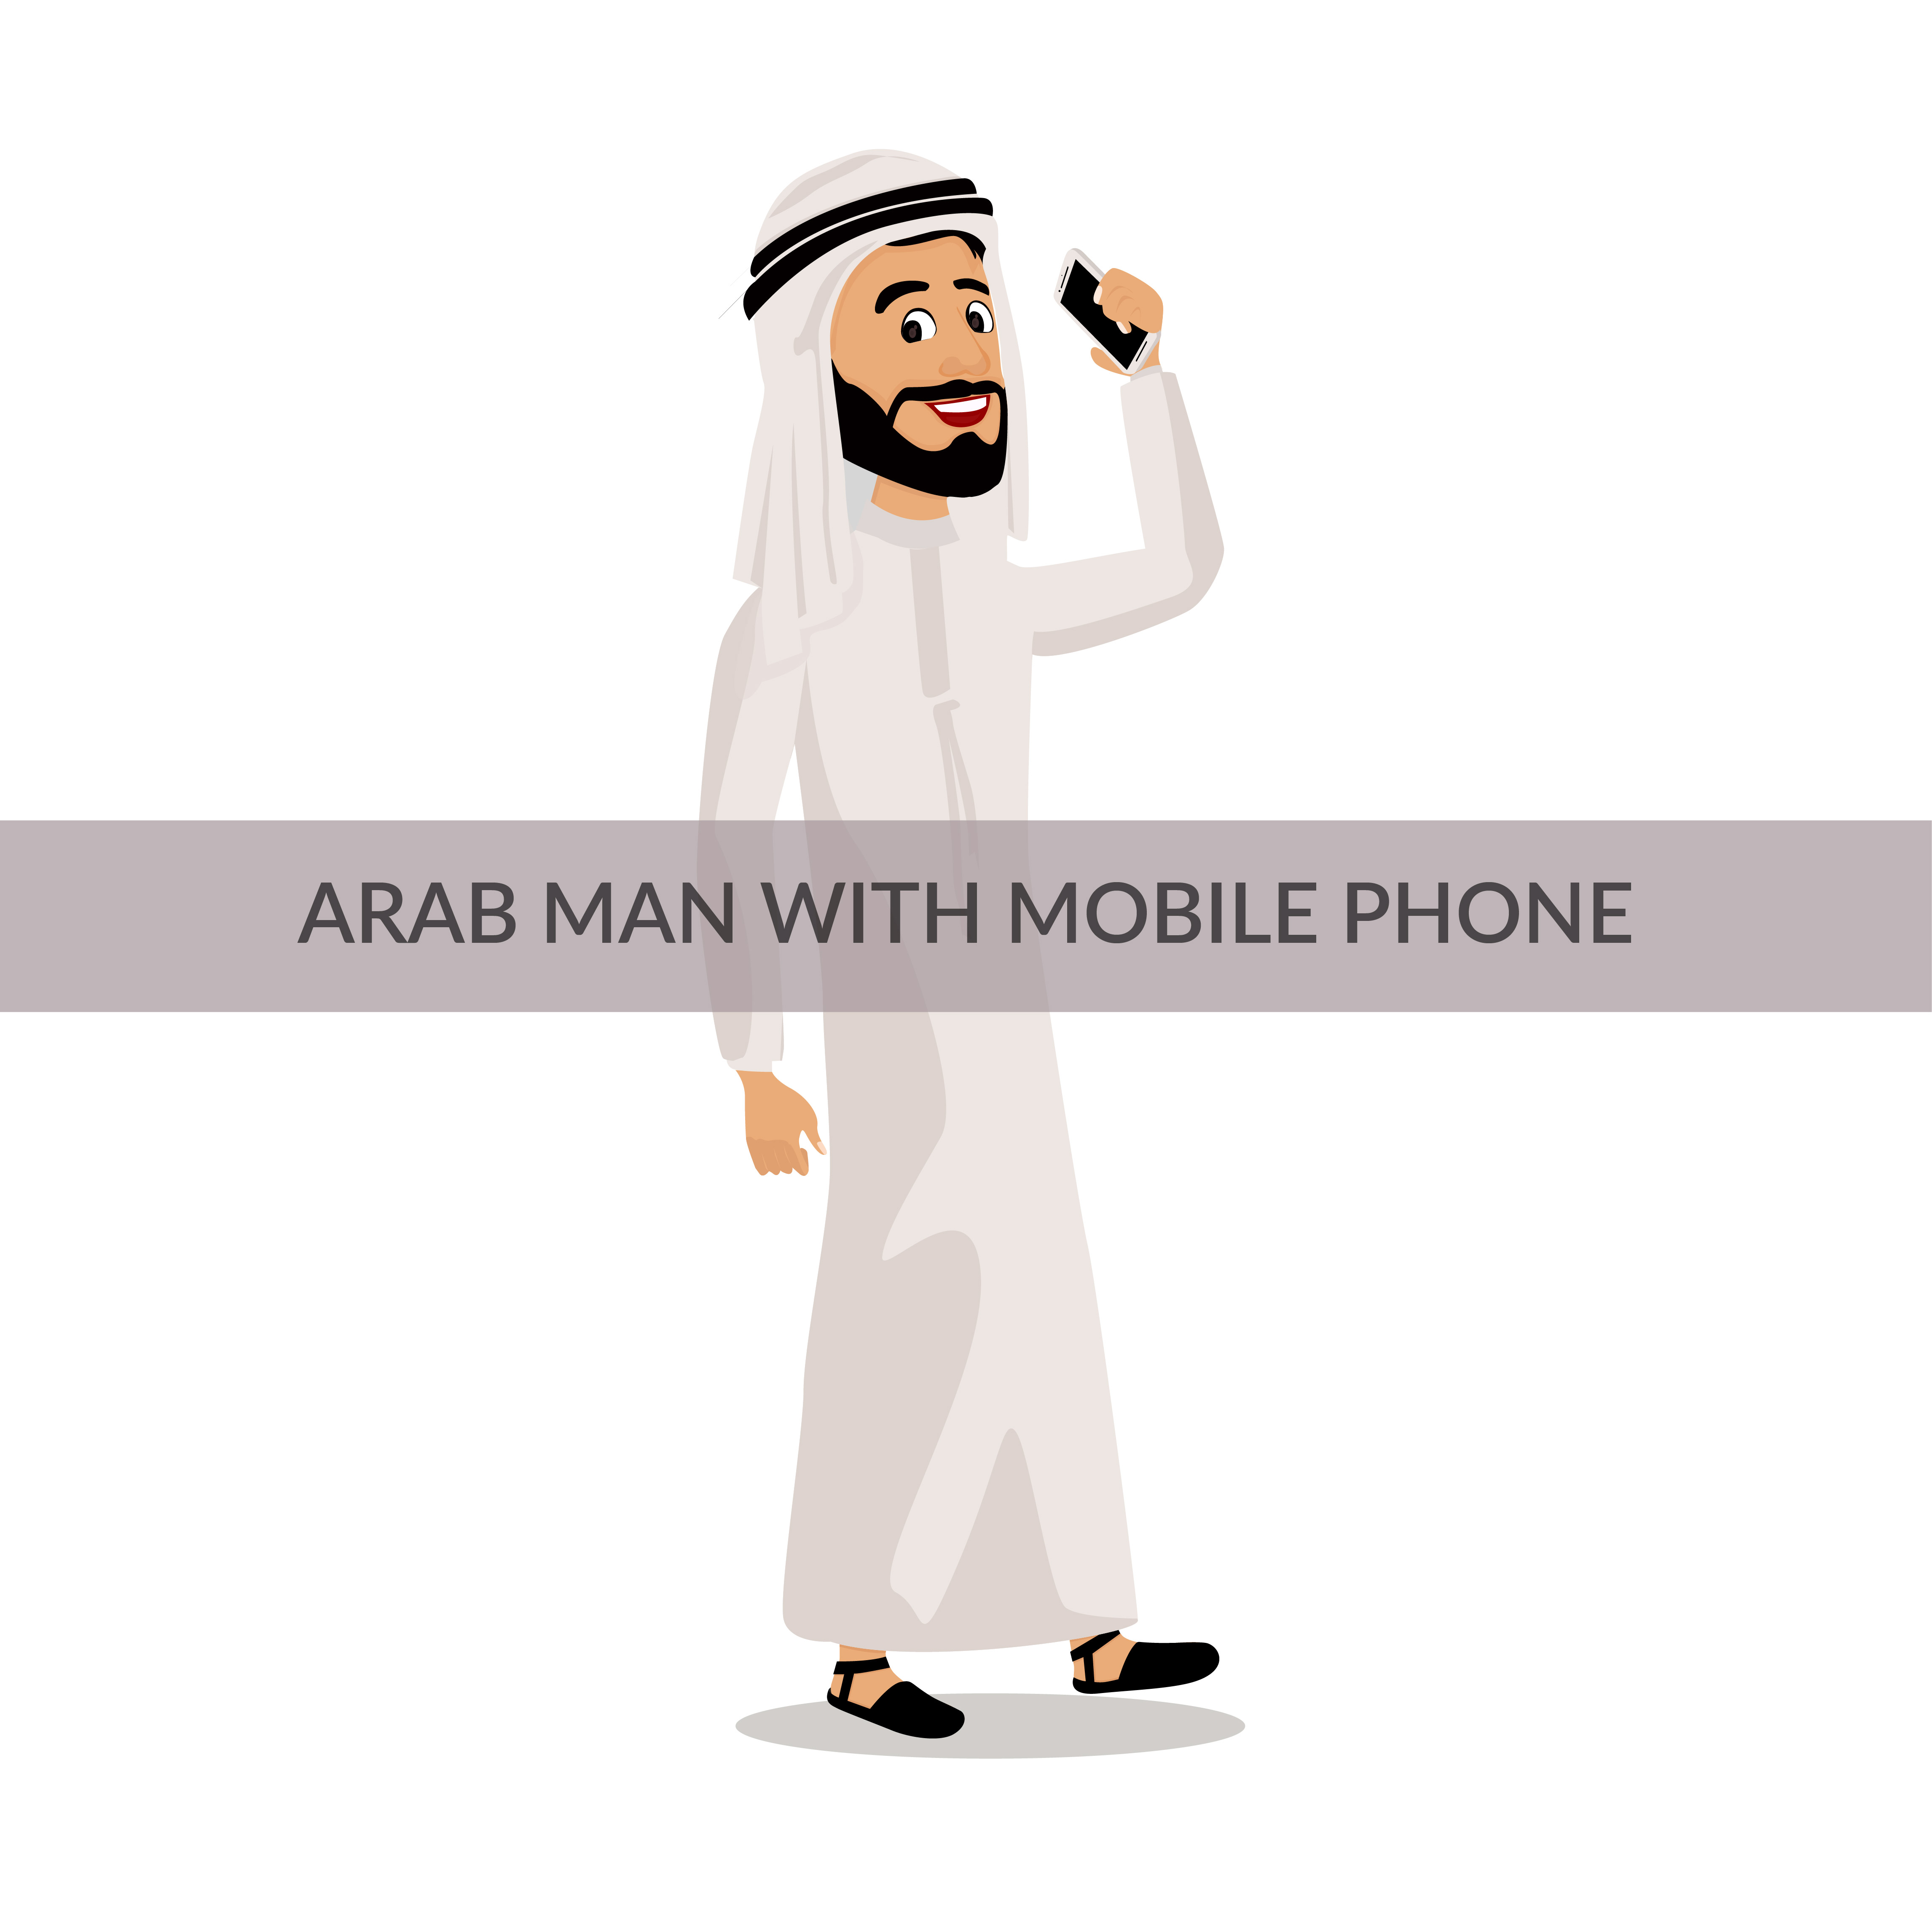 Man with a mobile phone in his hand.